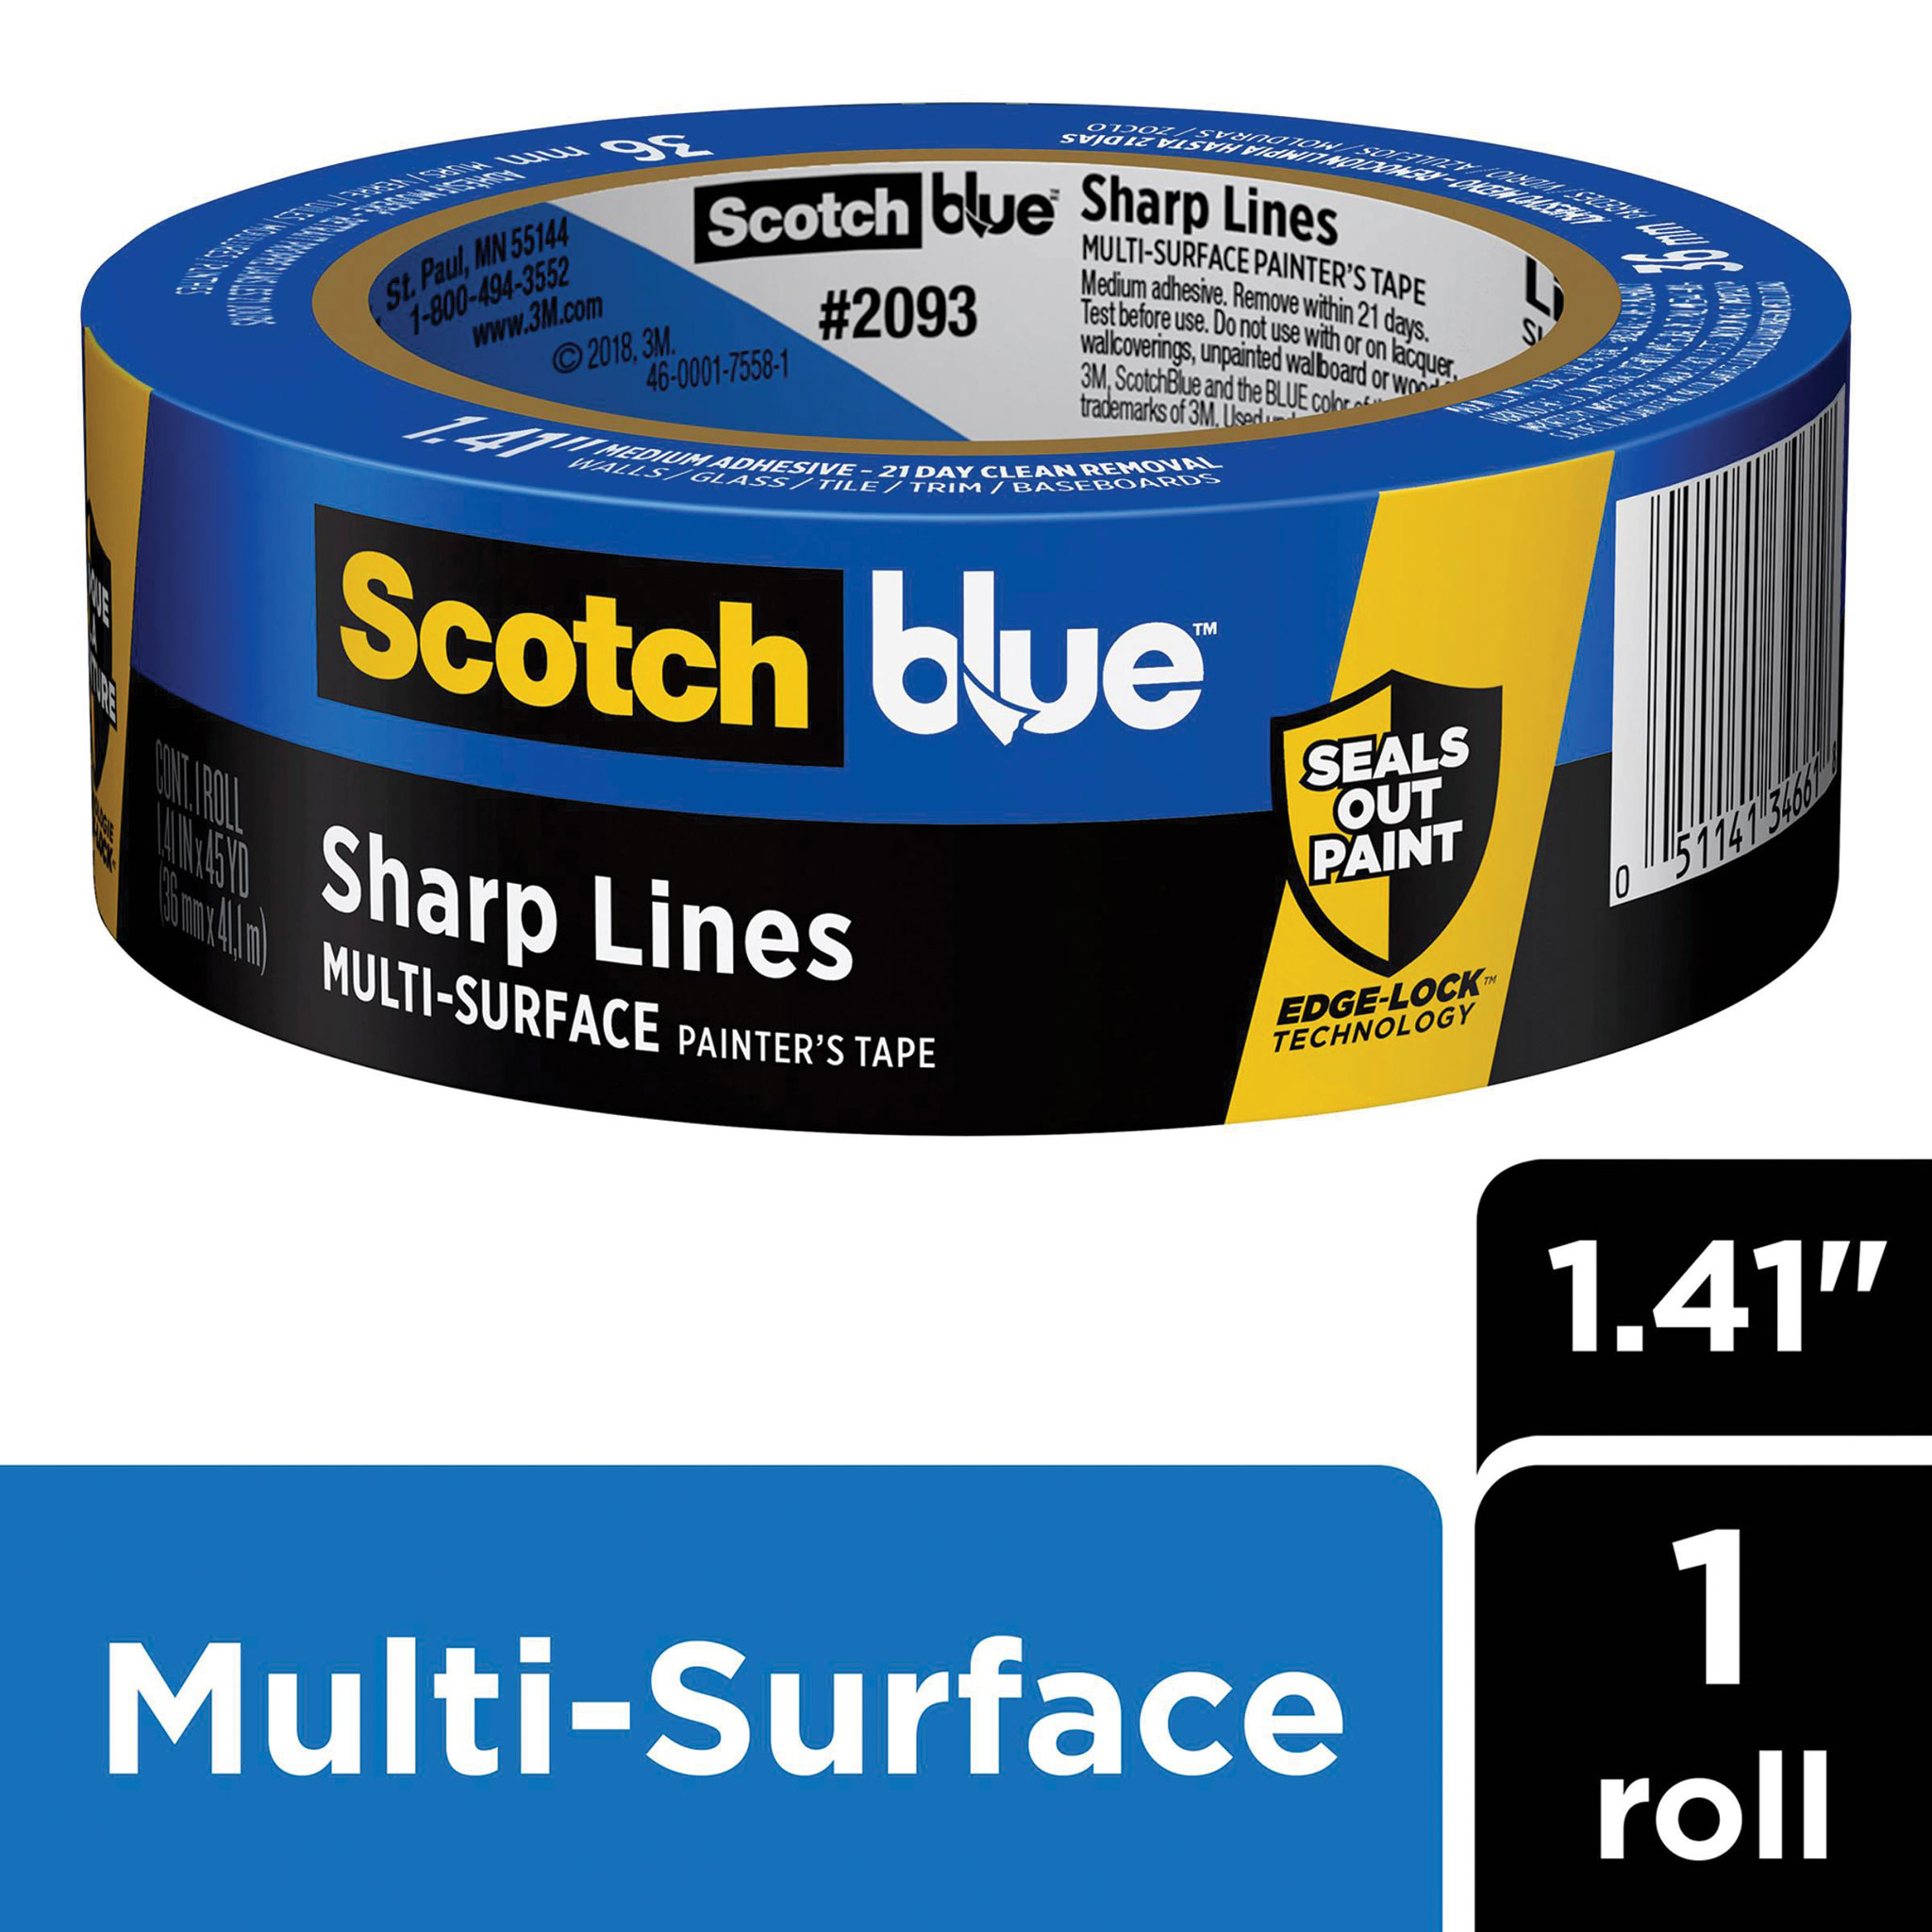 Scotch Artist Tape for Canvas